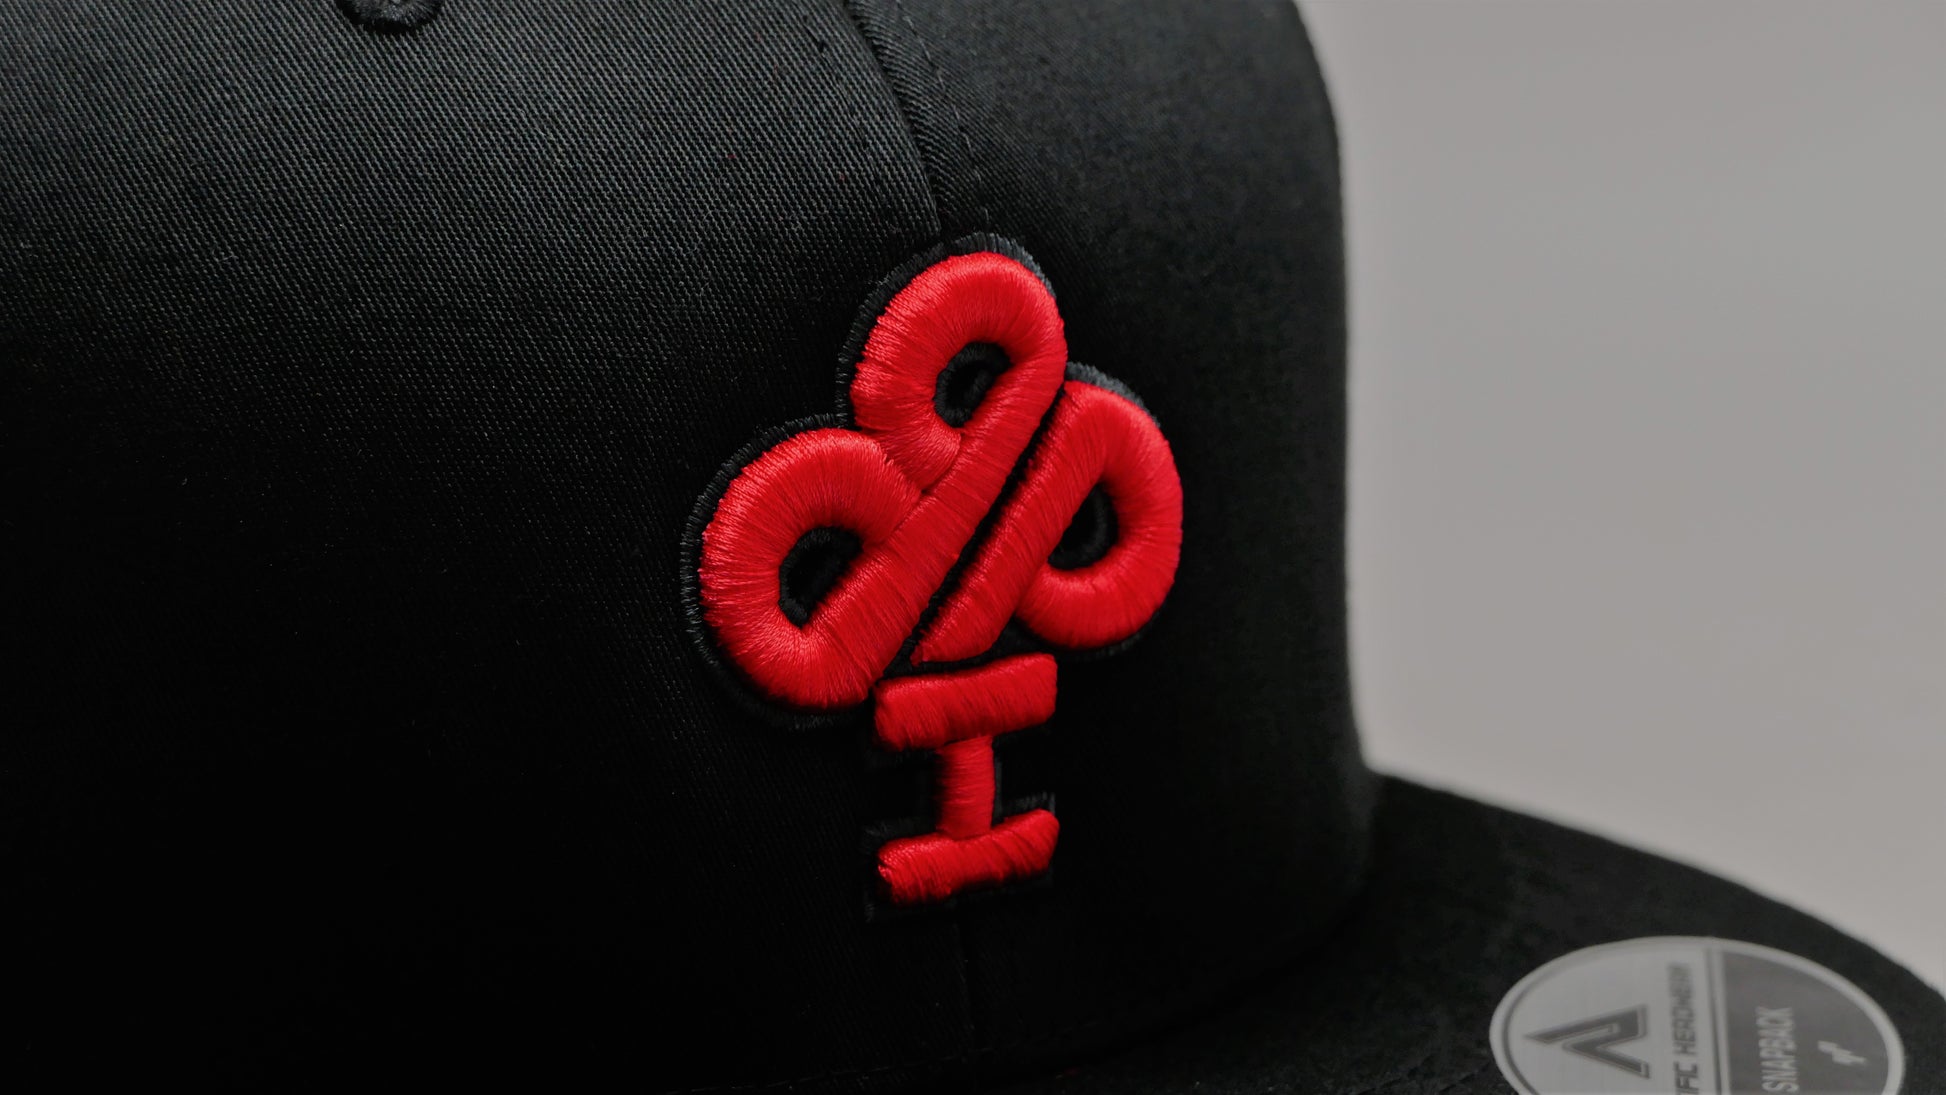 Black mesh Trucker cap / hat 3D 3-D embroidered ft the  Classic IBP logo in PUFF Embroidered in FIRE Red, FIRE & ICE!